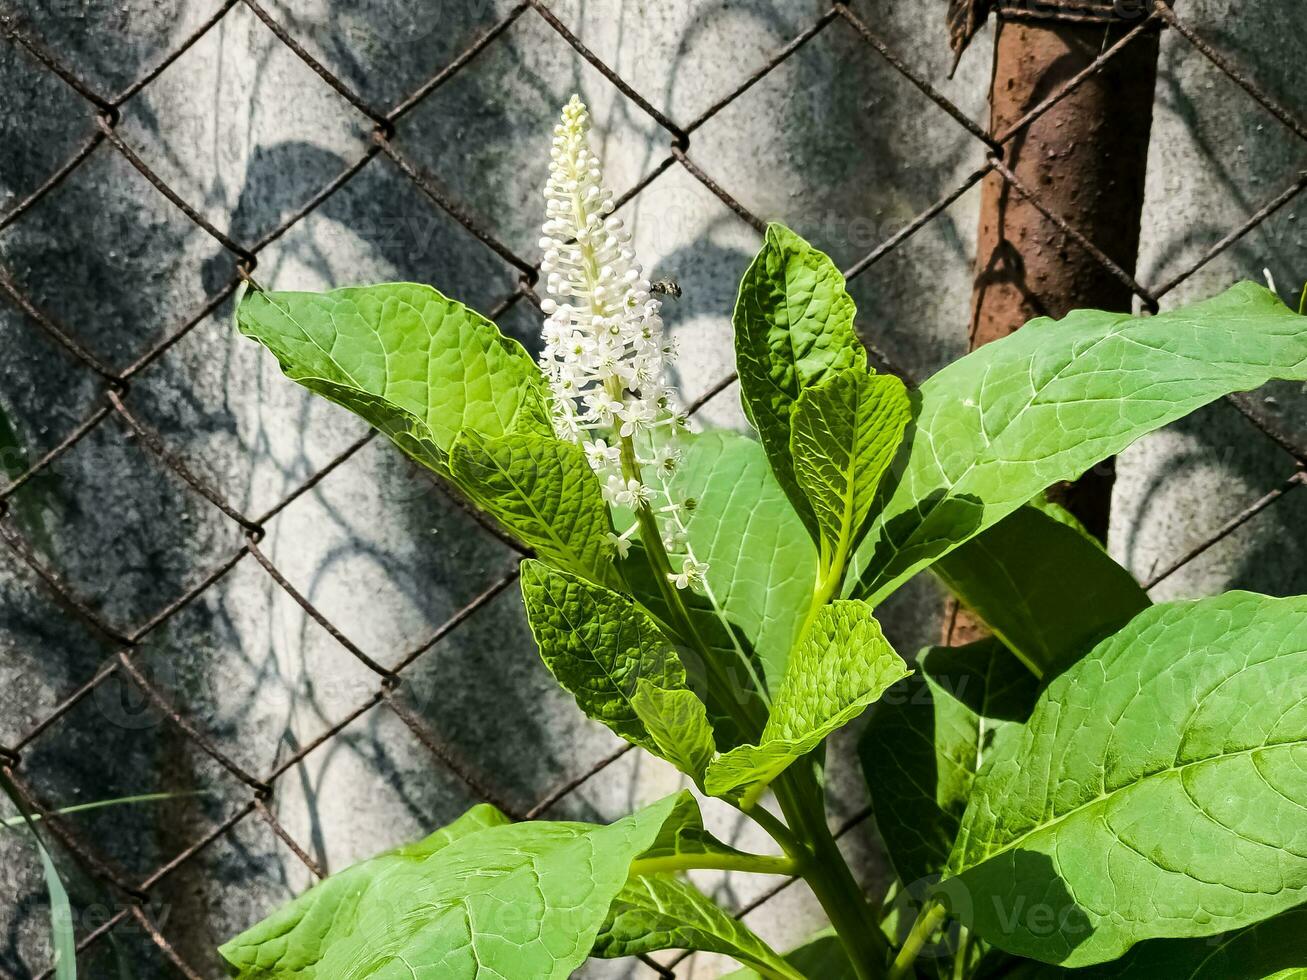 Phytolacca americana L, also known as American pokeweed, poke sallet, dragonberries, and inkberry, is a poisonous, herbaceous perennial plant in the family Phytolaccaceae. photo